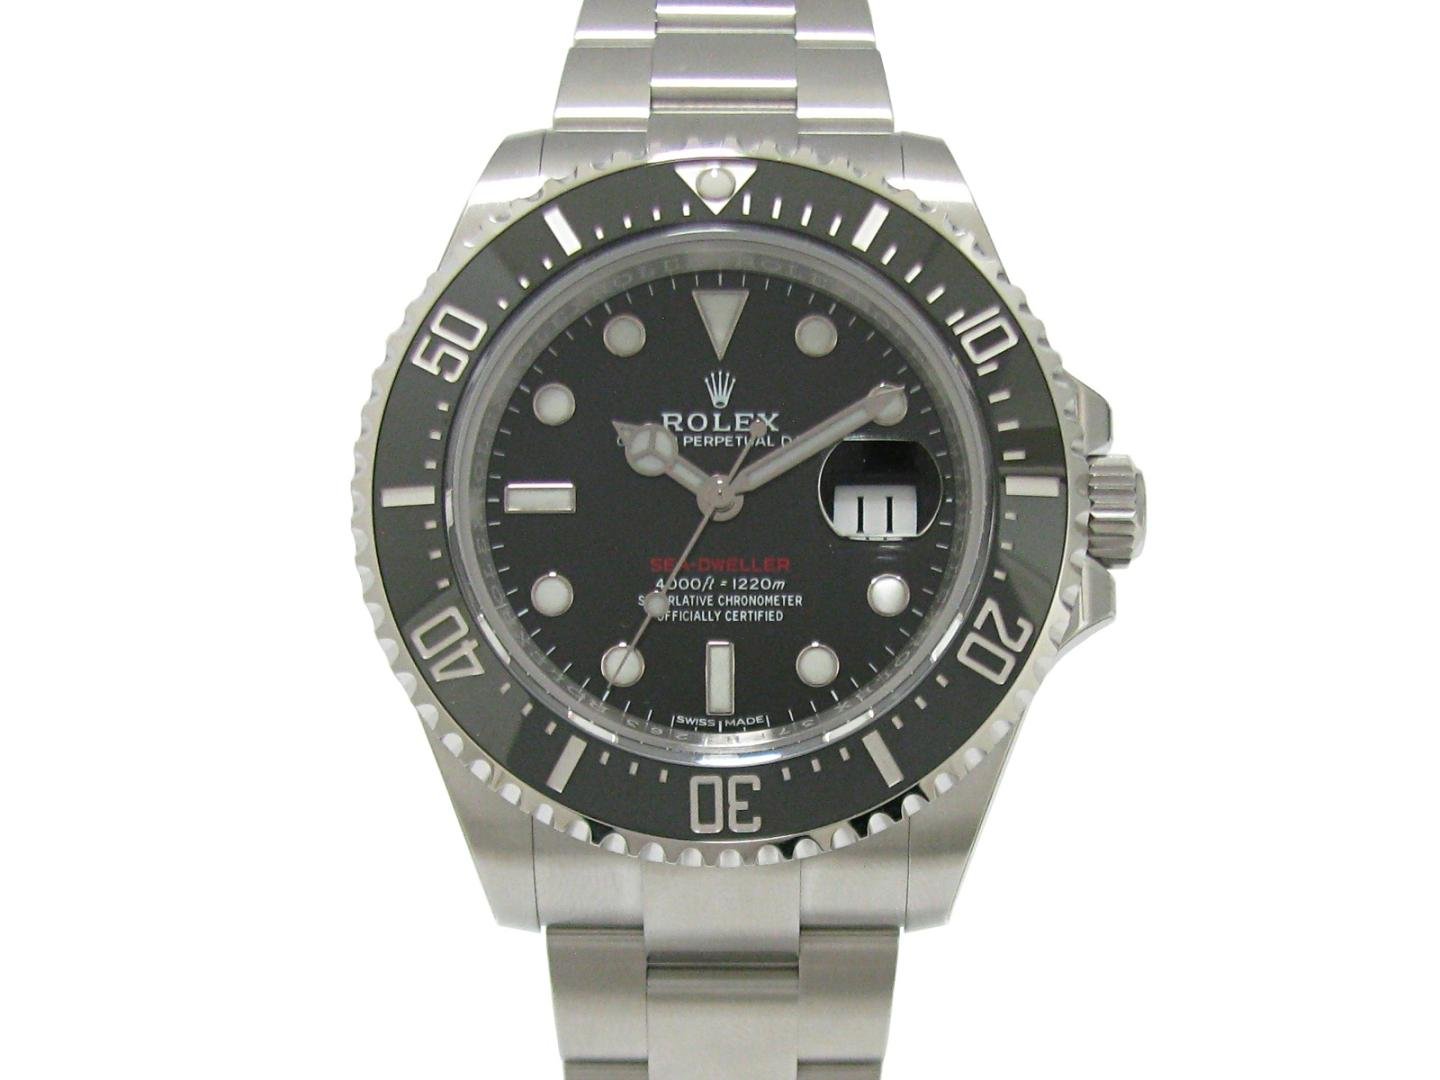 Rolex Oyster Perpetual Sea-Dweller 126600 Automatic Men’s Stainless Steel Watch